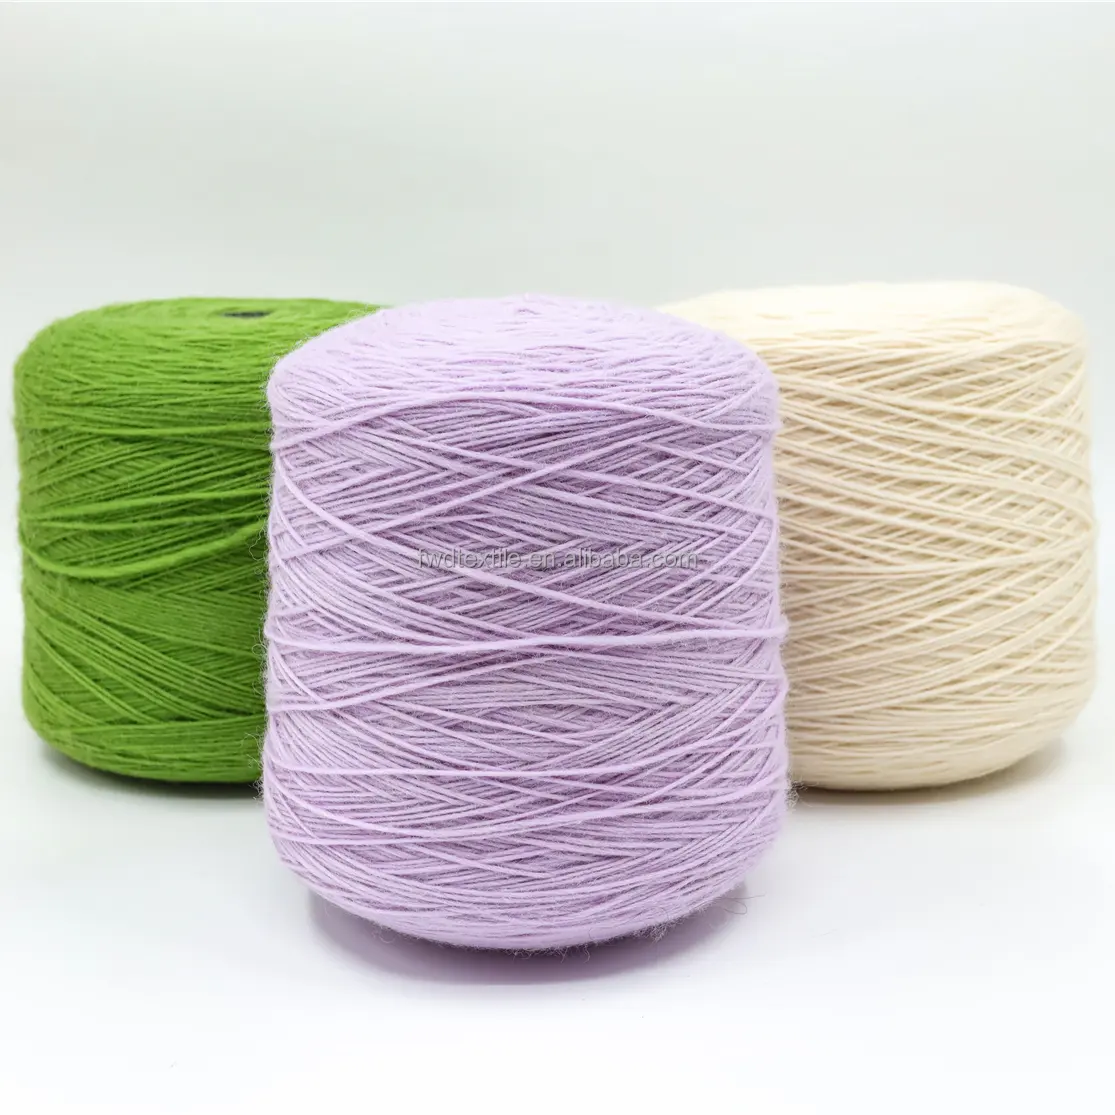 24 Colors Free Samples Bulky 100% Wool Cheap Worsted Wool Yarn for Knitting Sewing Sweaters